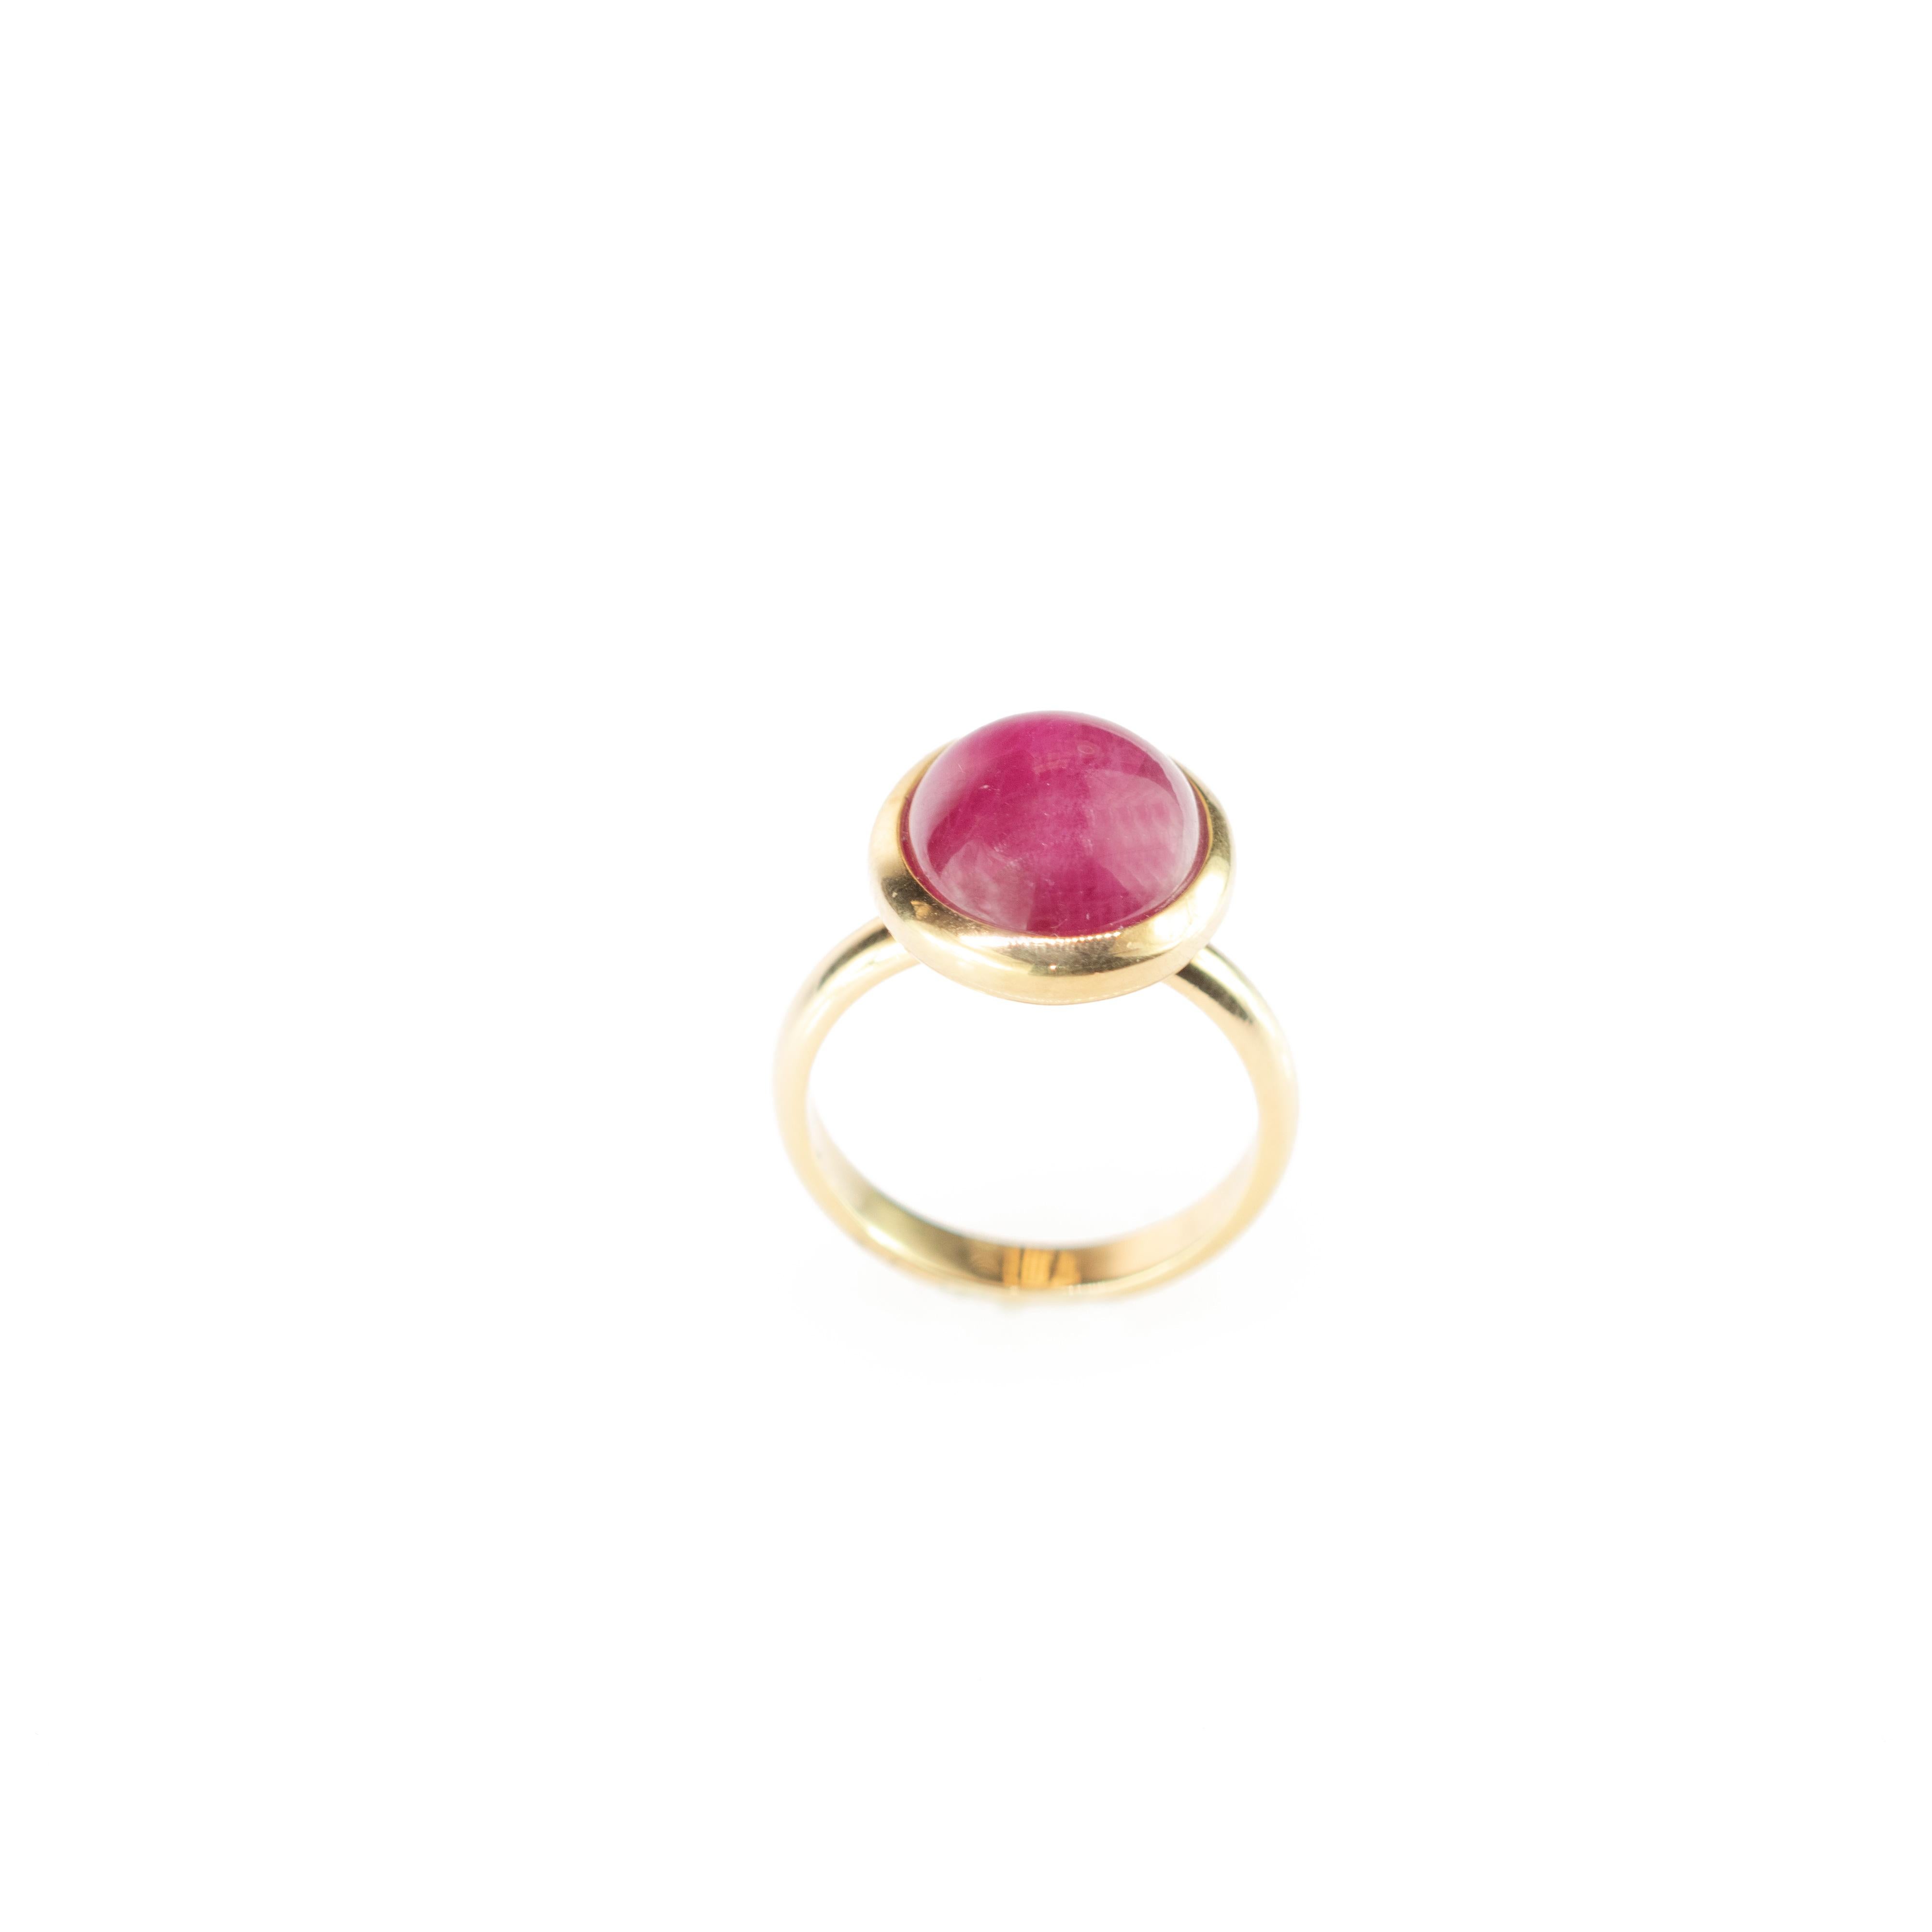 Delicate 18 karat yellow gold ring band with central purple ruby gem (11 g). A simple but exquisite solitaire design of an oval and cabochon cocktail jewel.
 
This ring is designed for the active and independent woman of the 21st century. Its bold